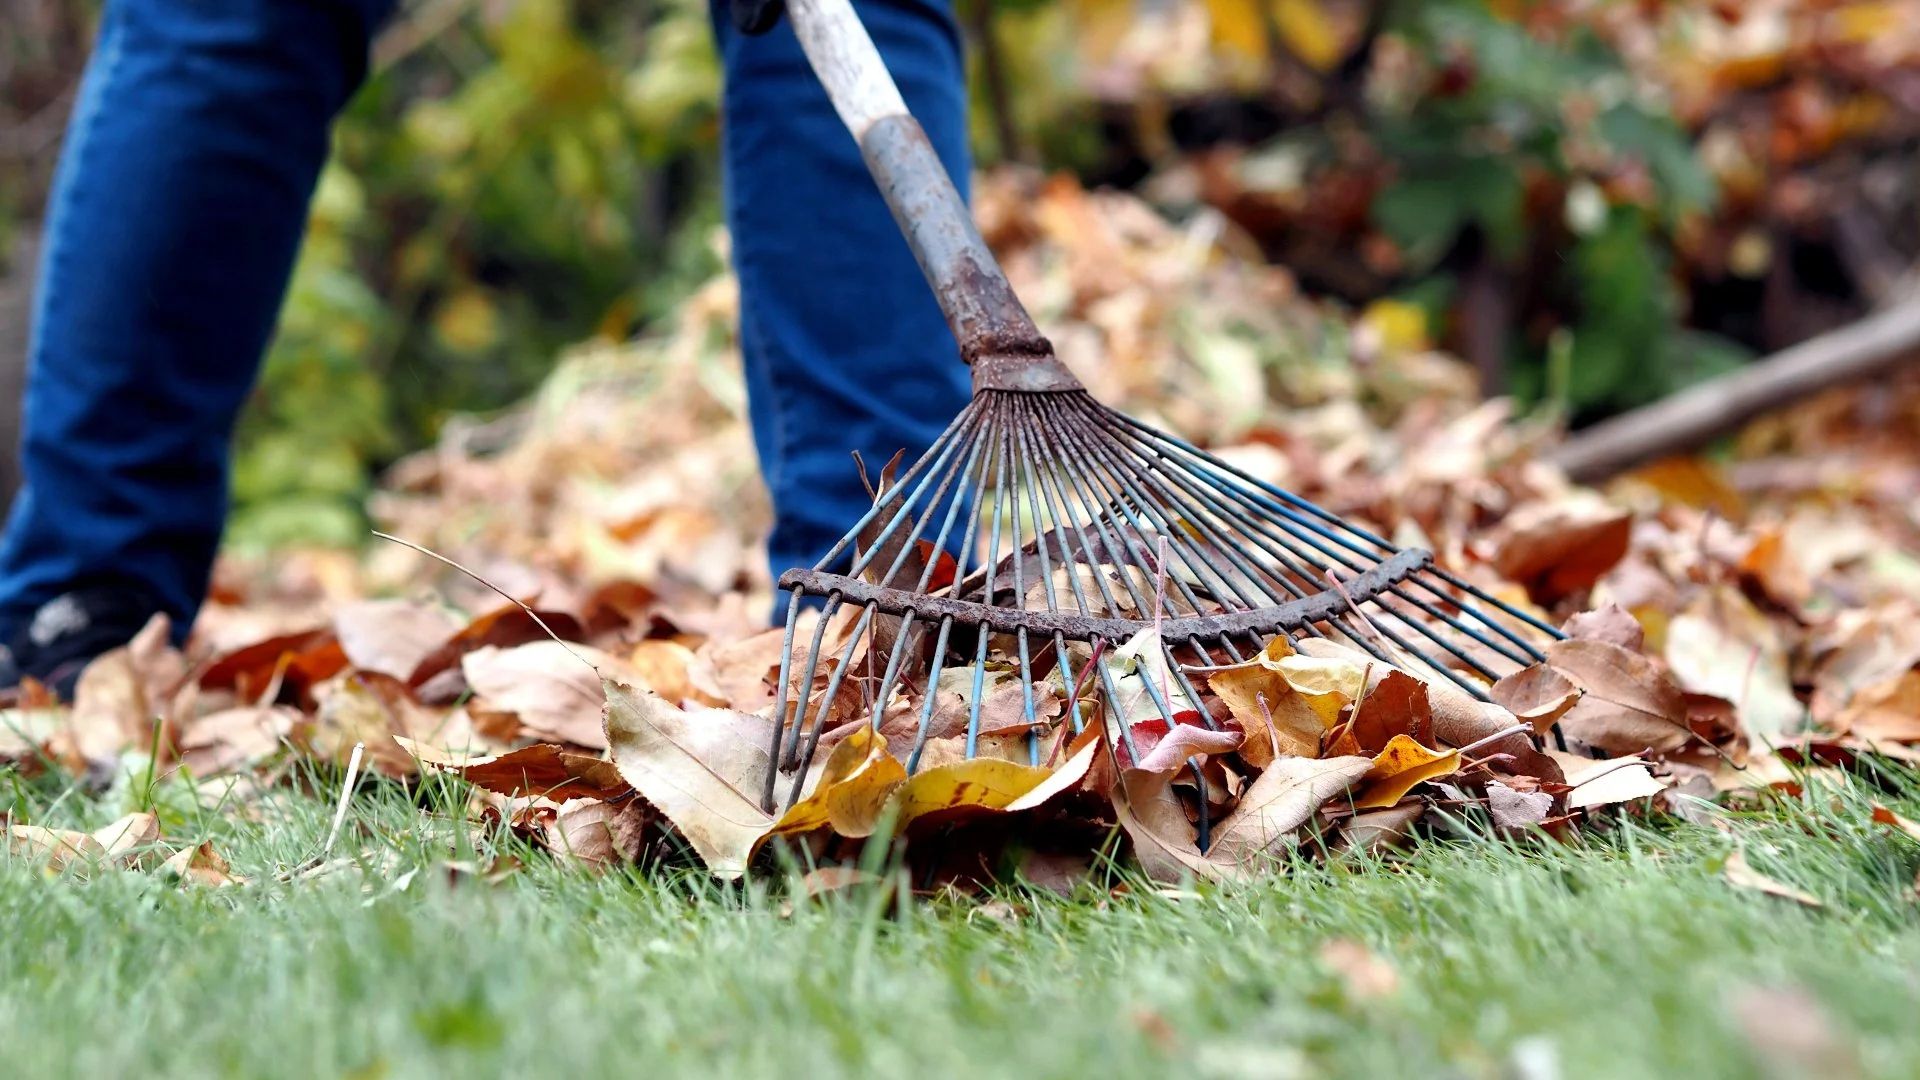 Should You Continually Clean Up Leaf Piles or Wait & Do It All at Once?